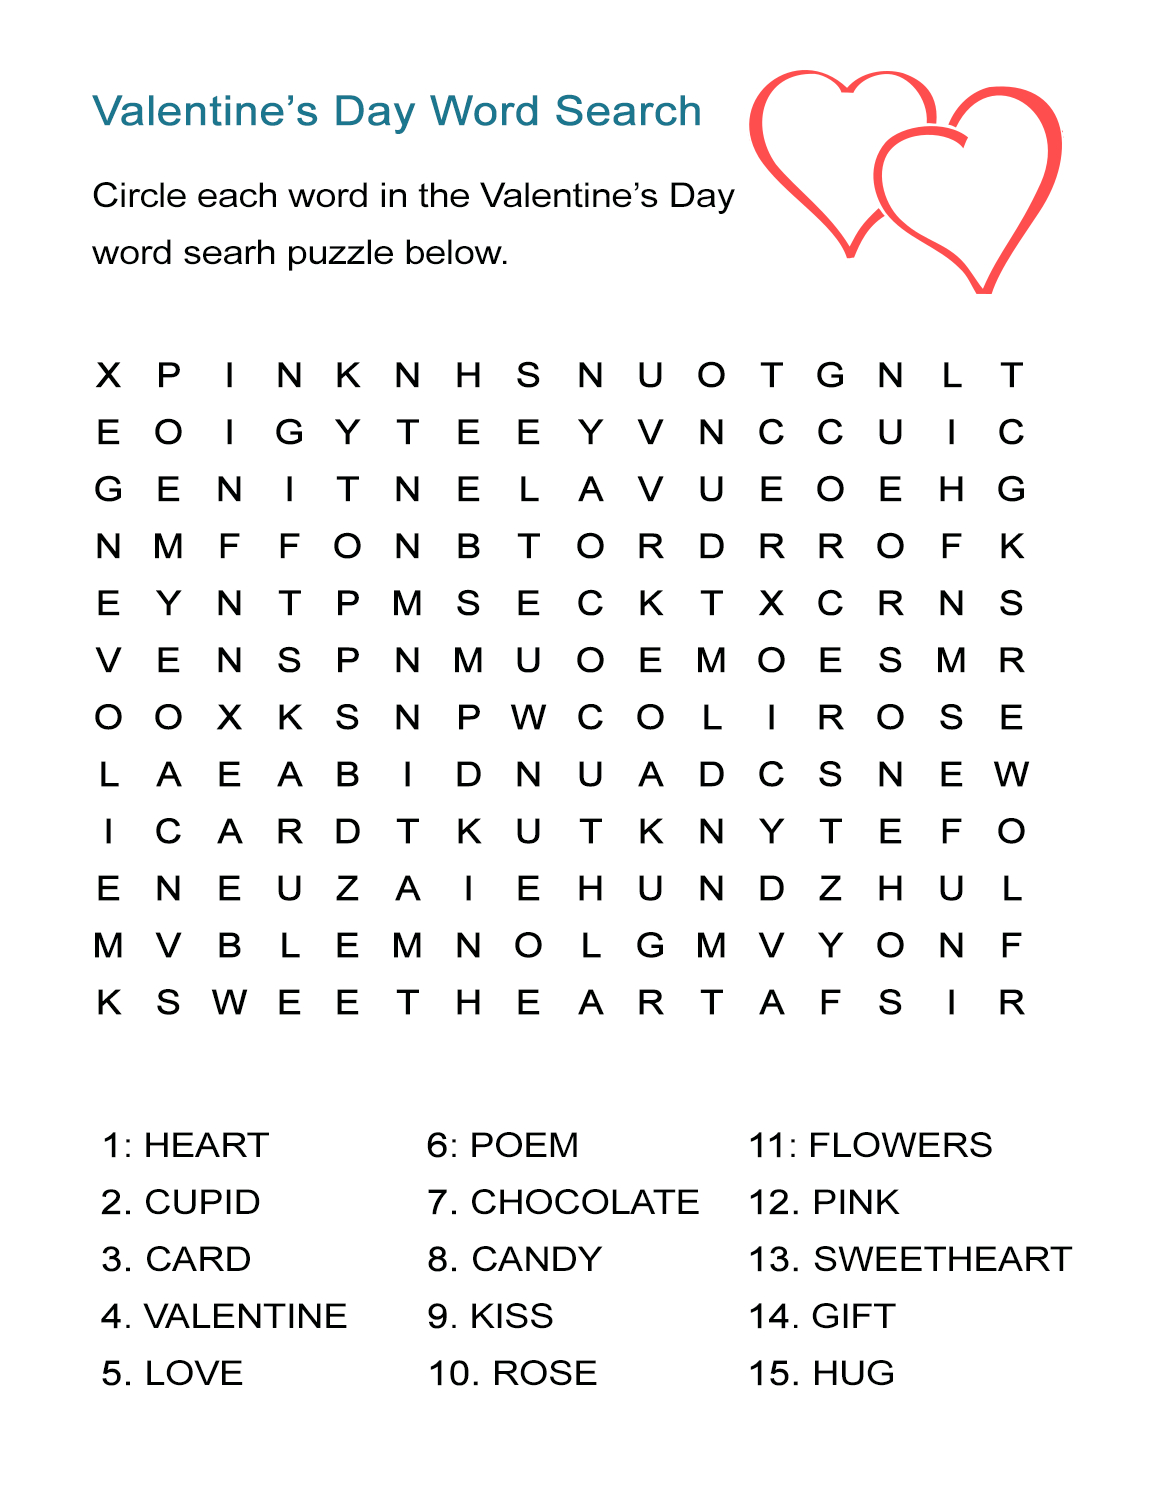 Valentine's Day Word Search Puzzle: Free Worksheet For February 14 - Free Printable Valentine Word Search For Adults